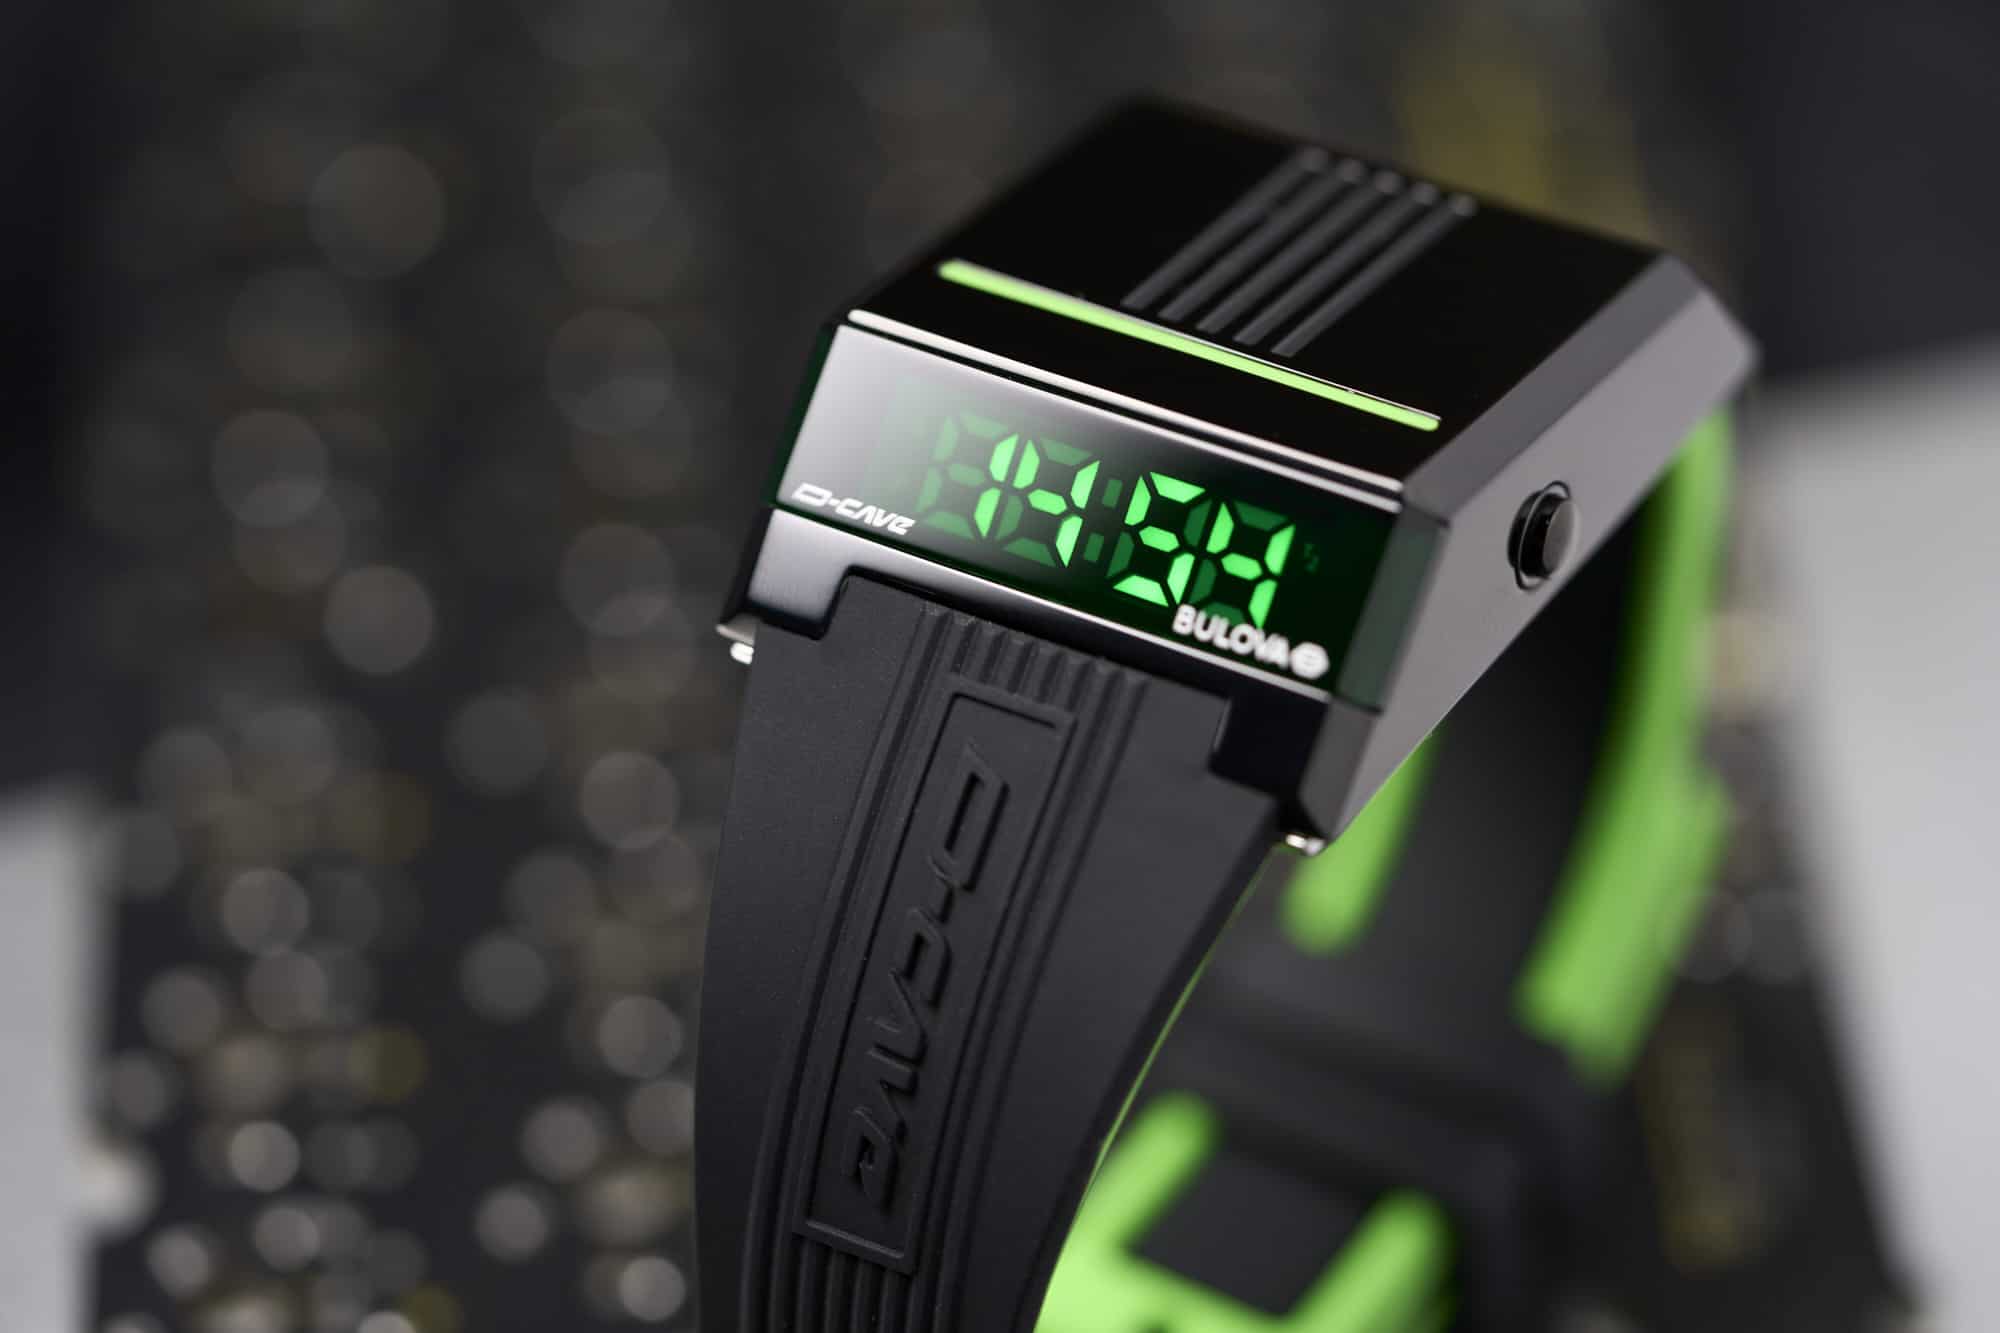 Digital Get Down! – Our Favorite Digital Watches In The Windup Watch Shop